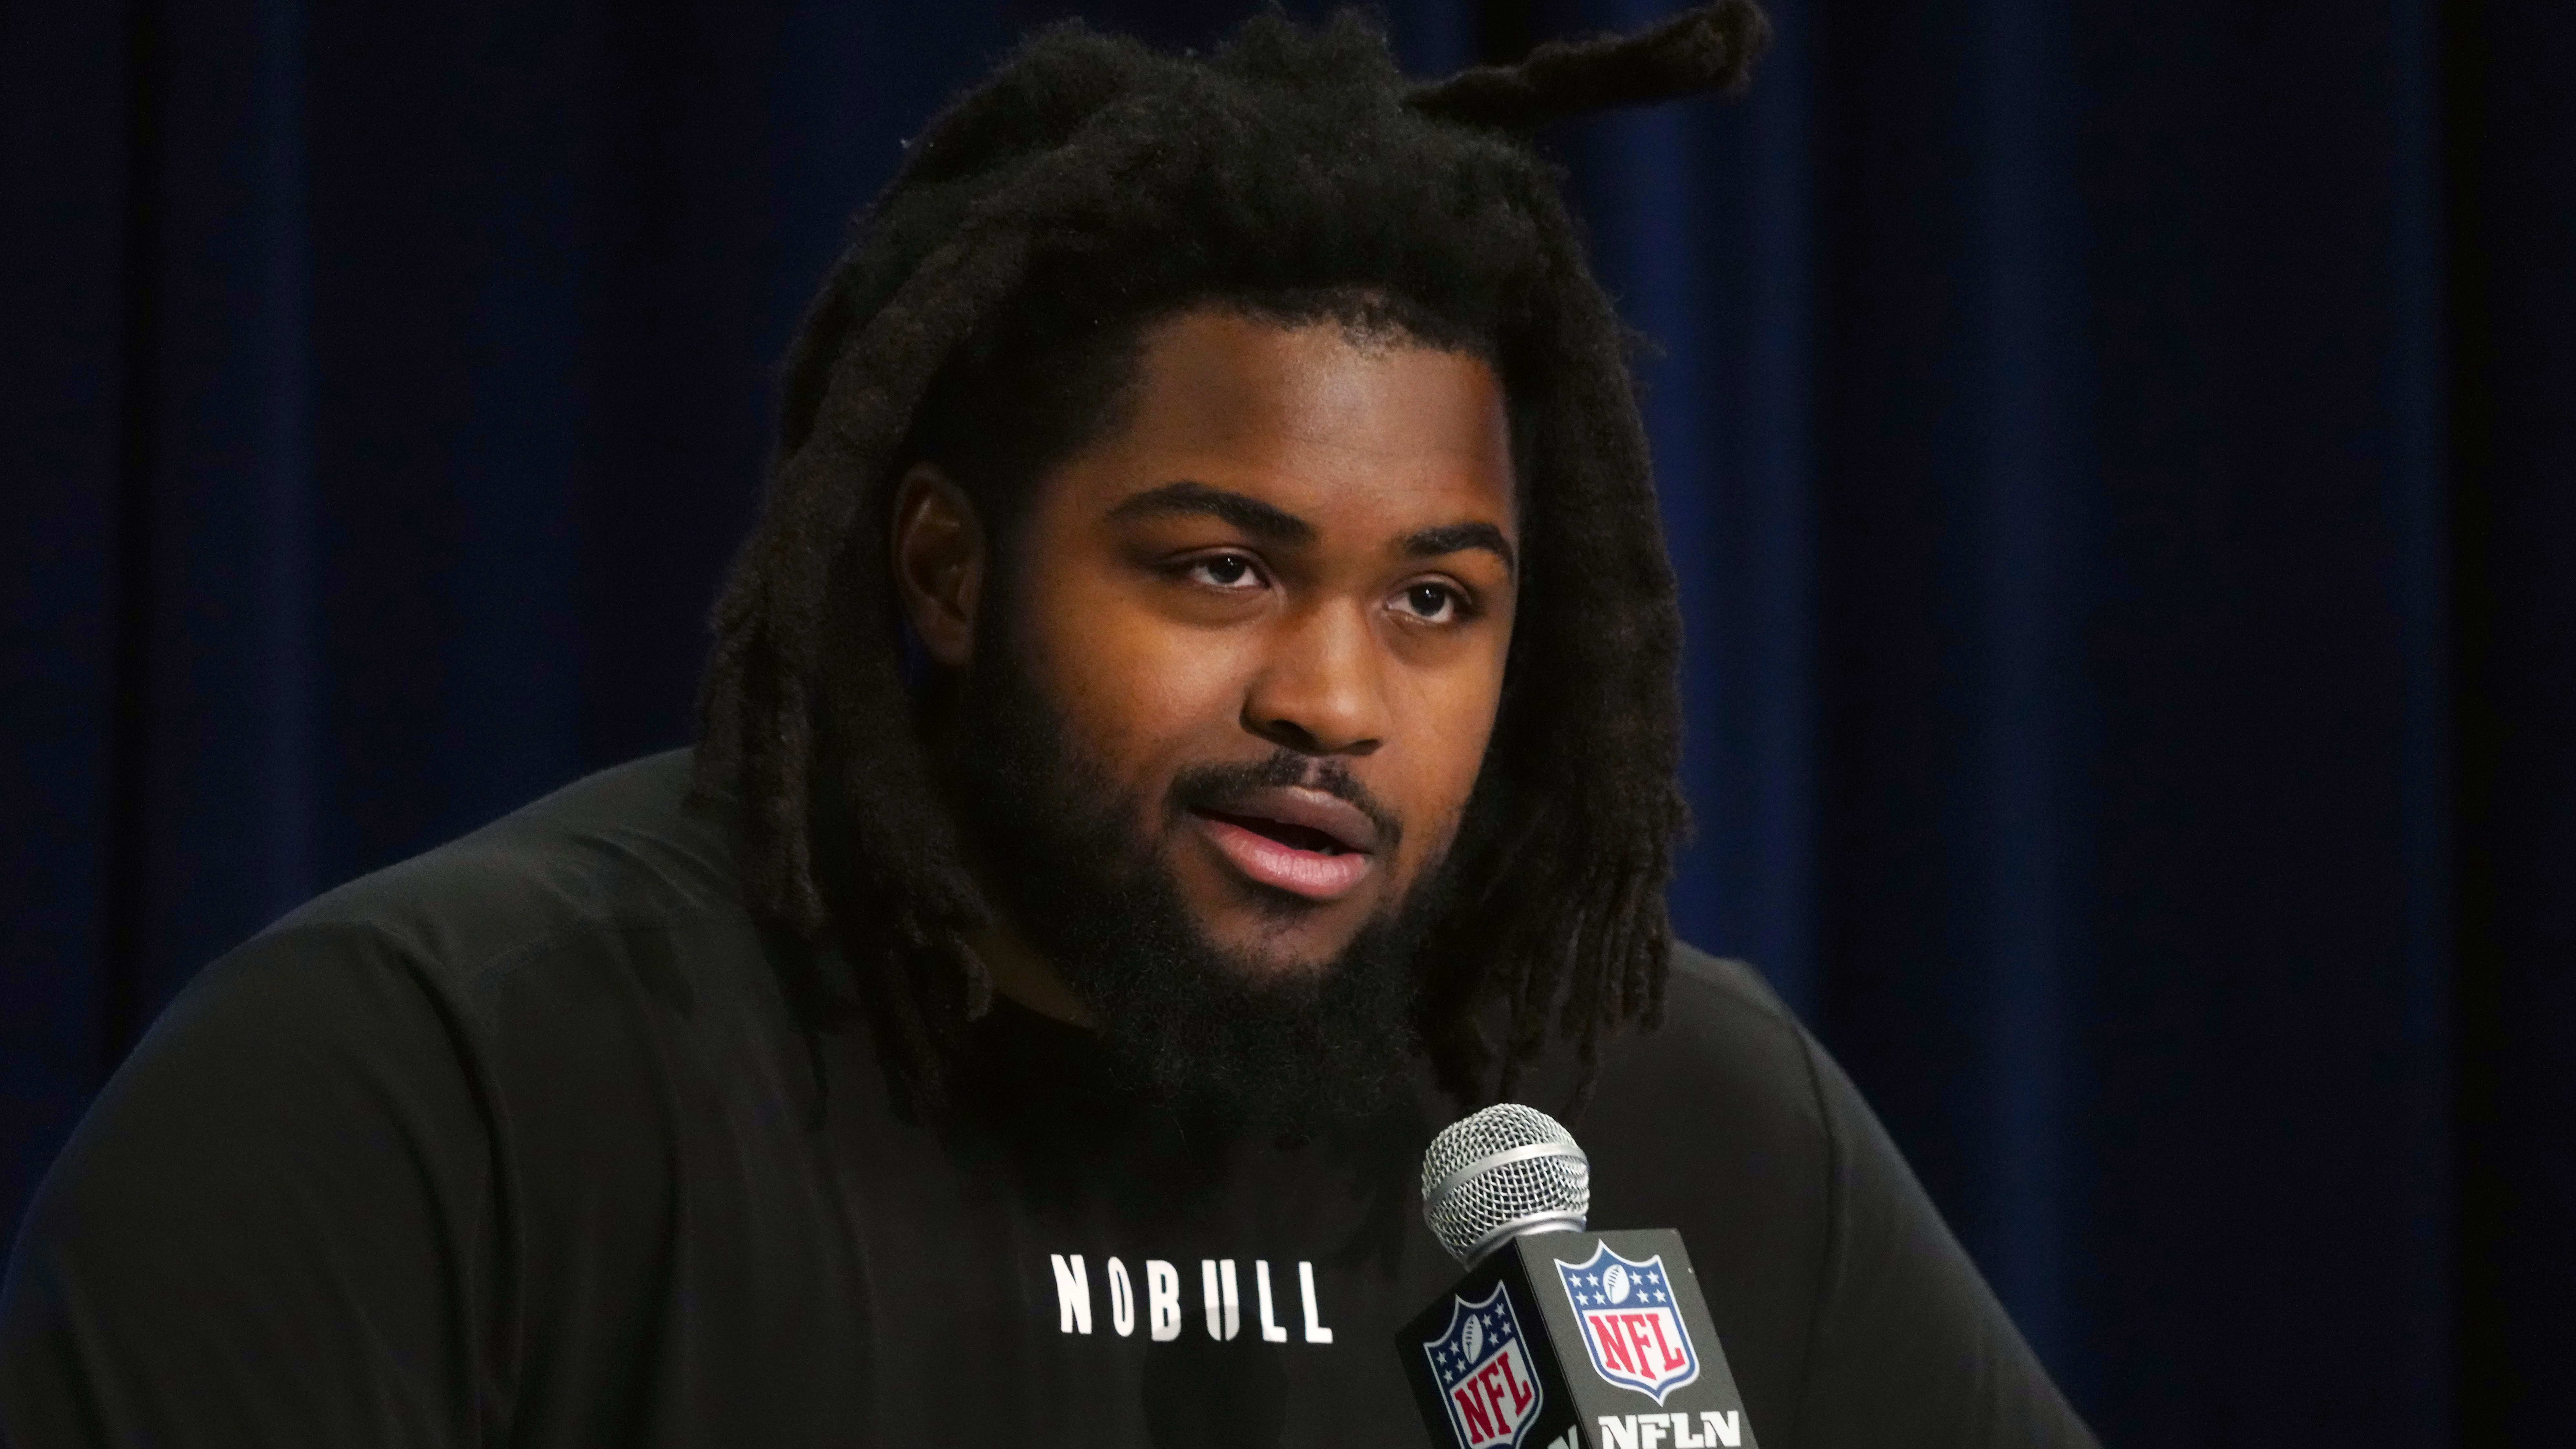  Illinois defensive lineman Johnny Newton (DL20) speaks to media at the NFL Scouting Combine.